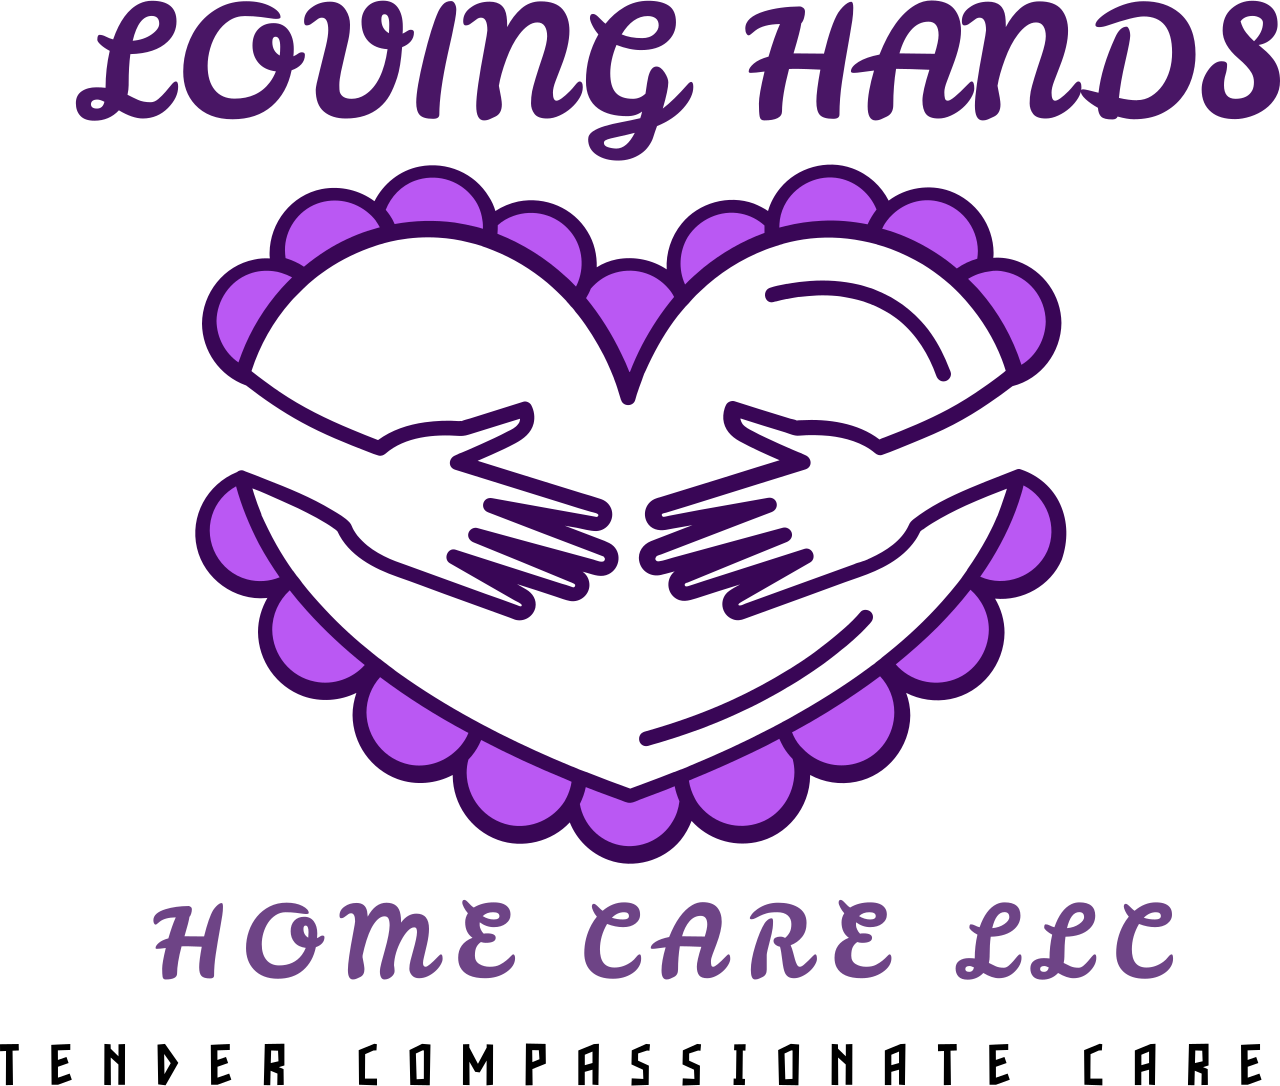  HOME CARE LLC's web page